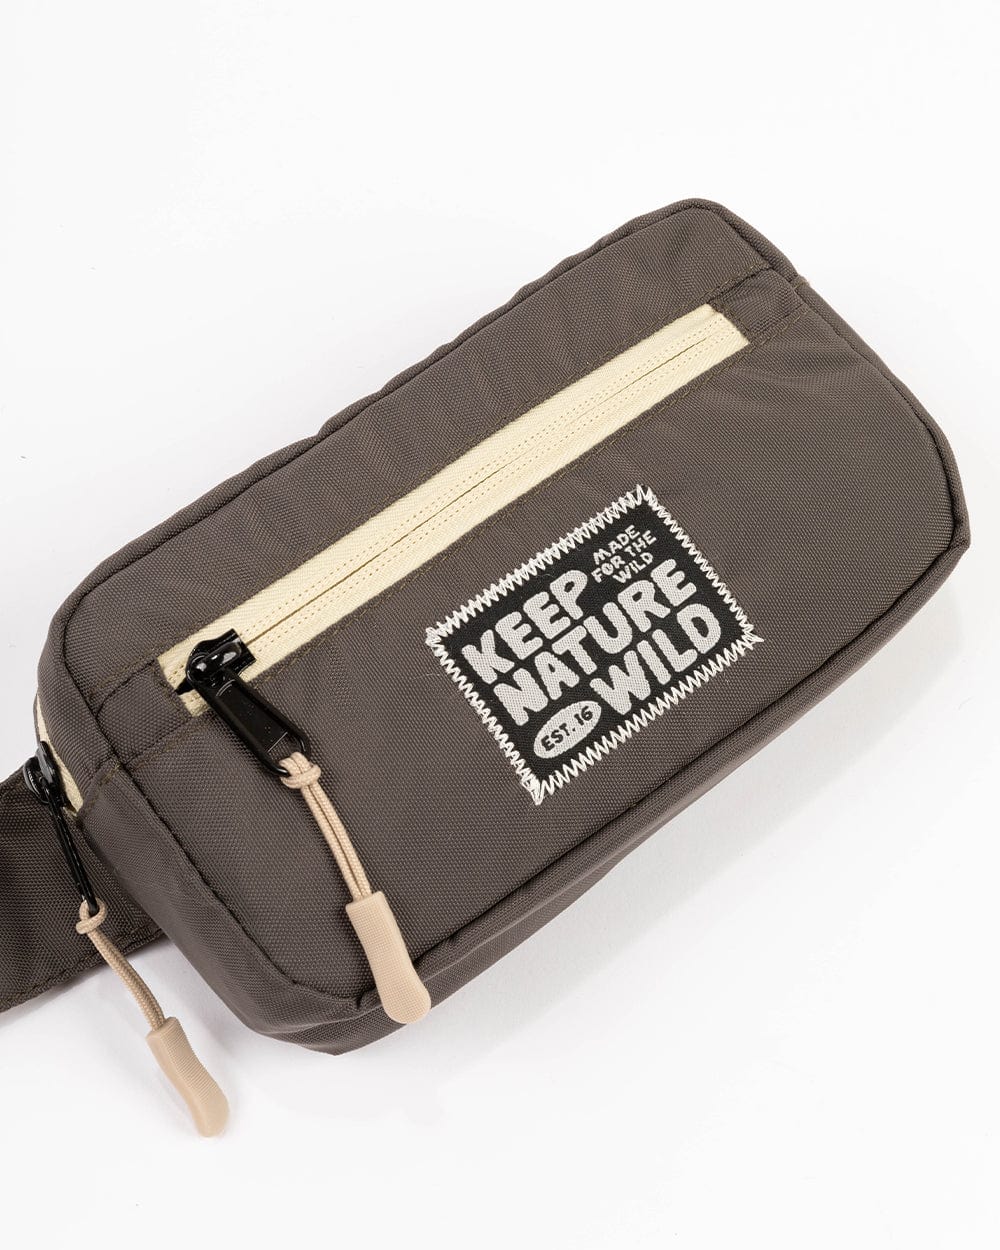 Keep Nature Wild PREORDER: KNW Fanny Pack Mini | Coal/Cream